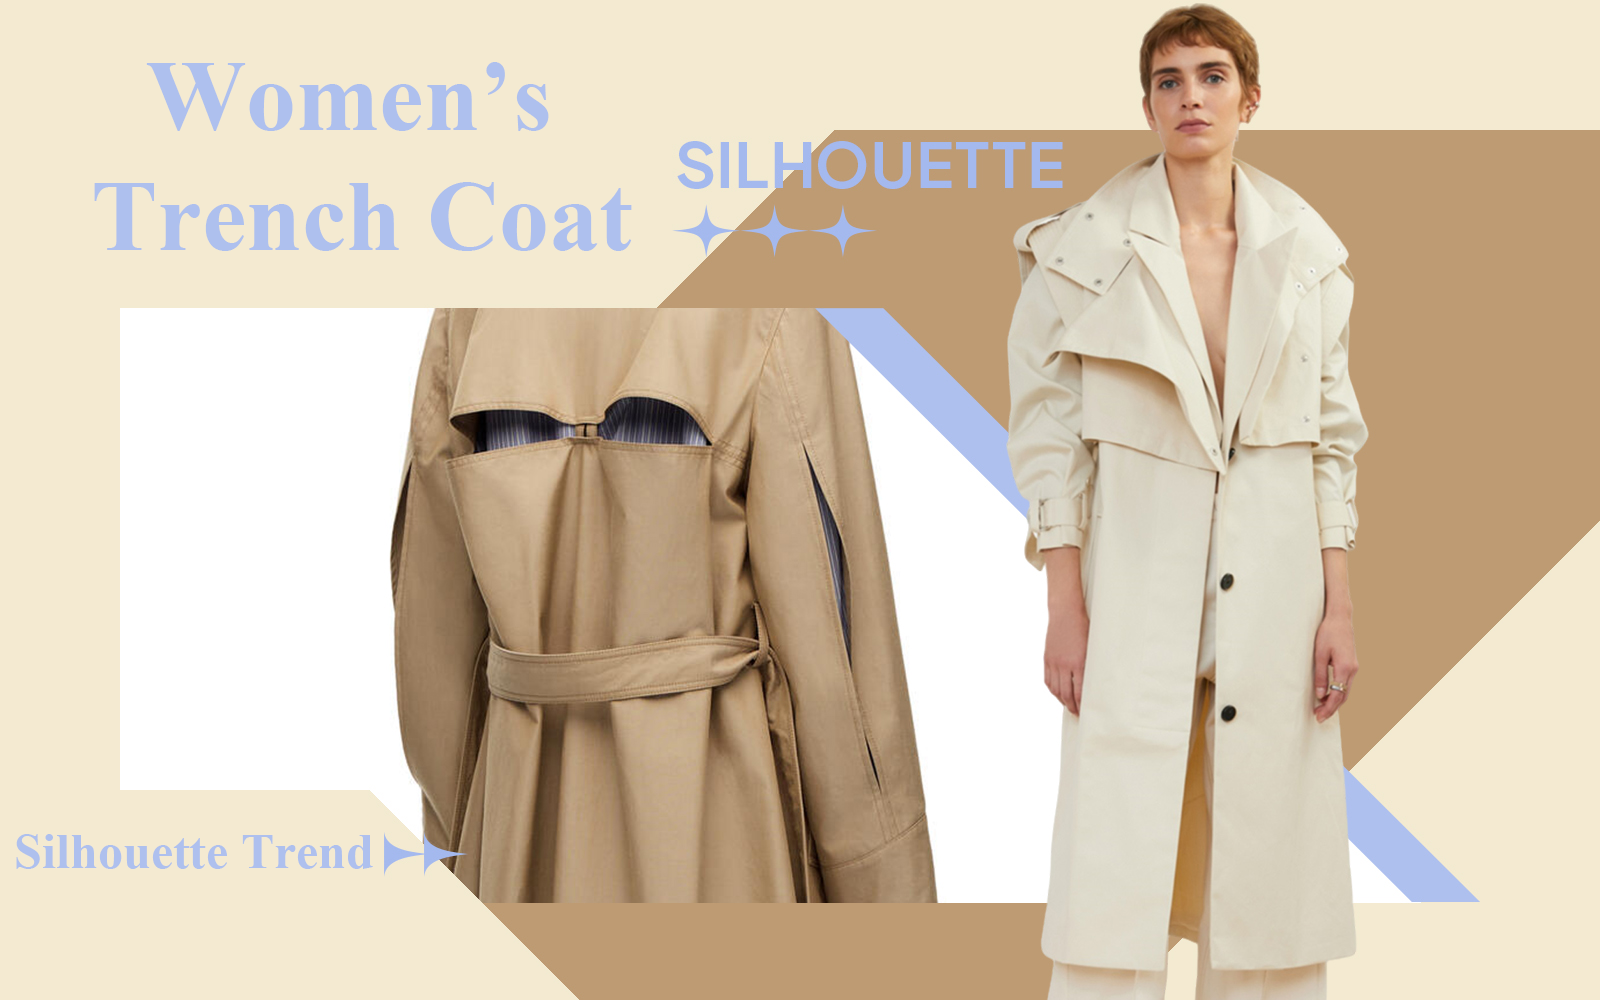 Practical Commuting -- The Silhouette Trend for Women's Trench Coat